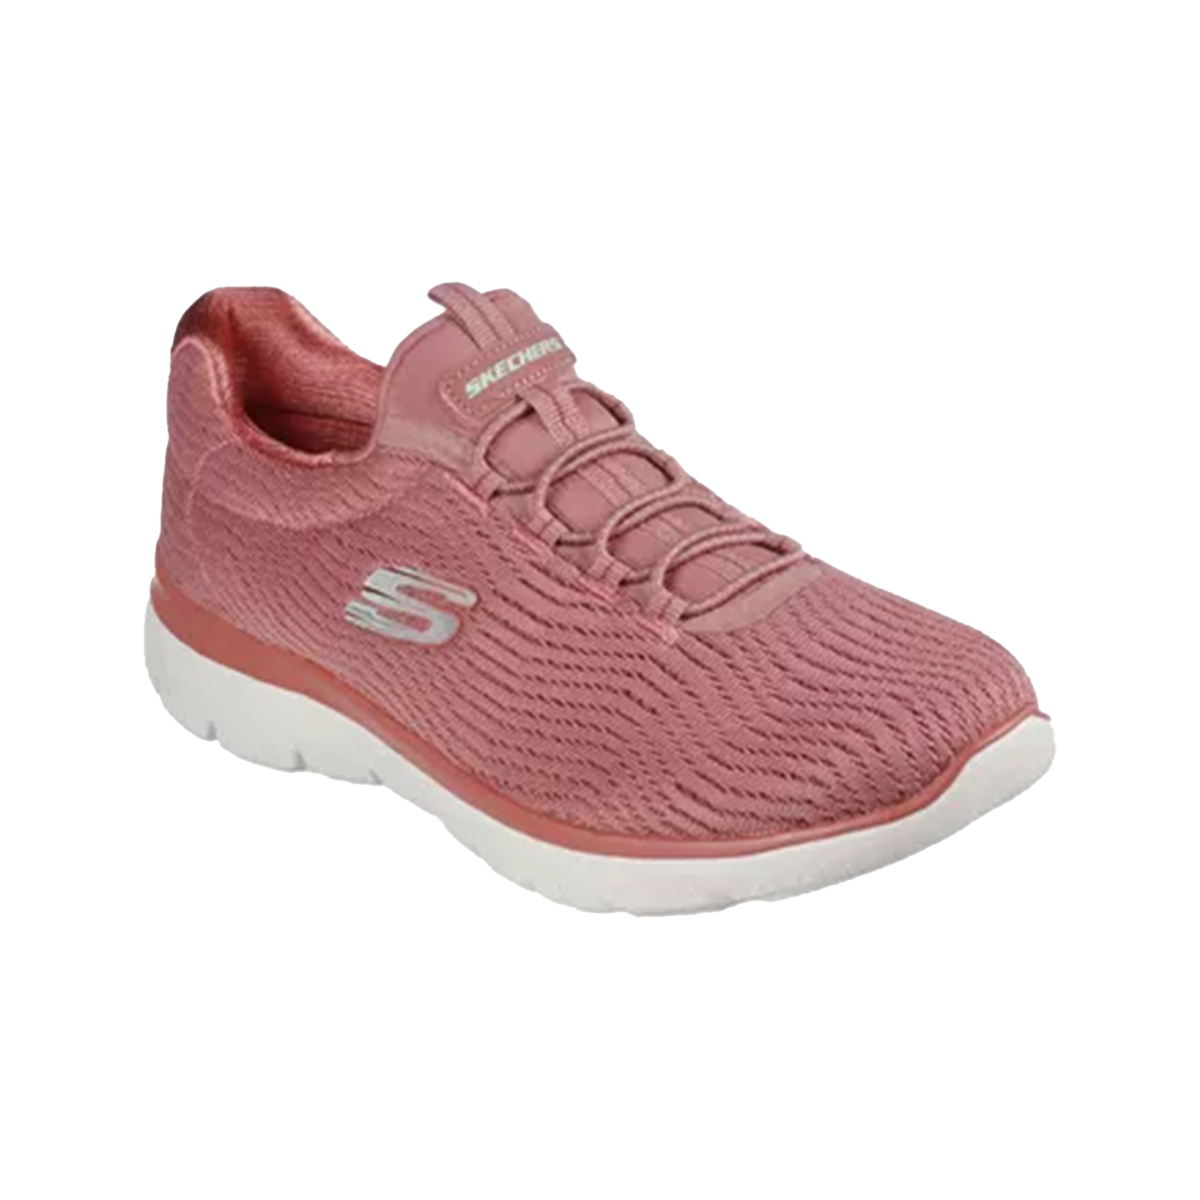 Skechers Summits Next Wave Shoes For Women, Dark Rose